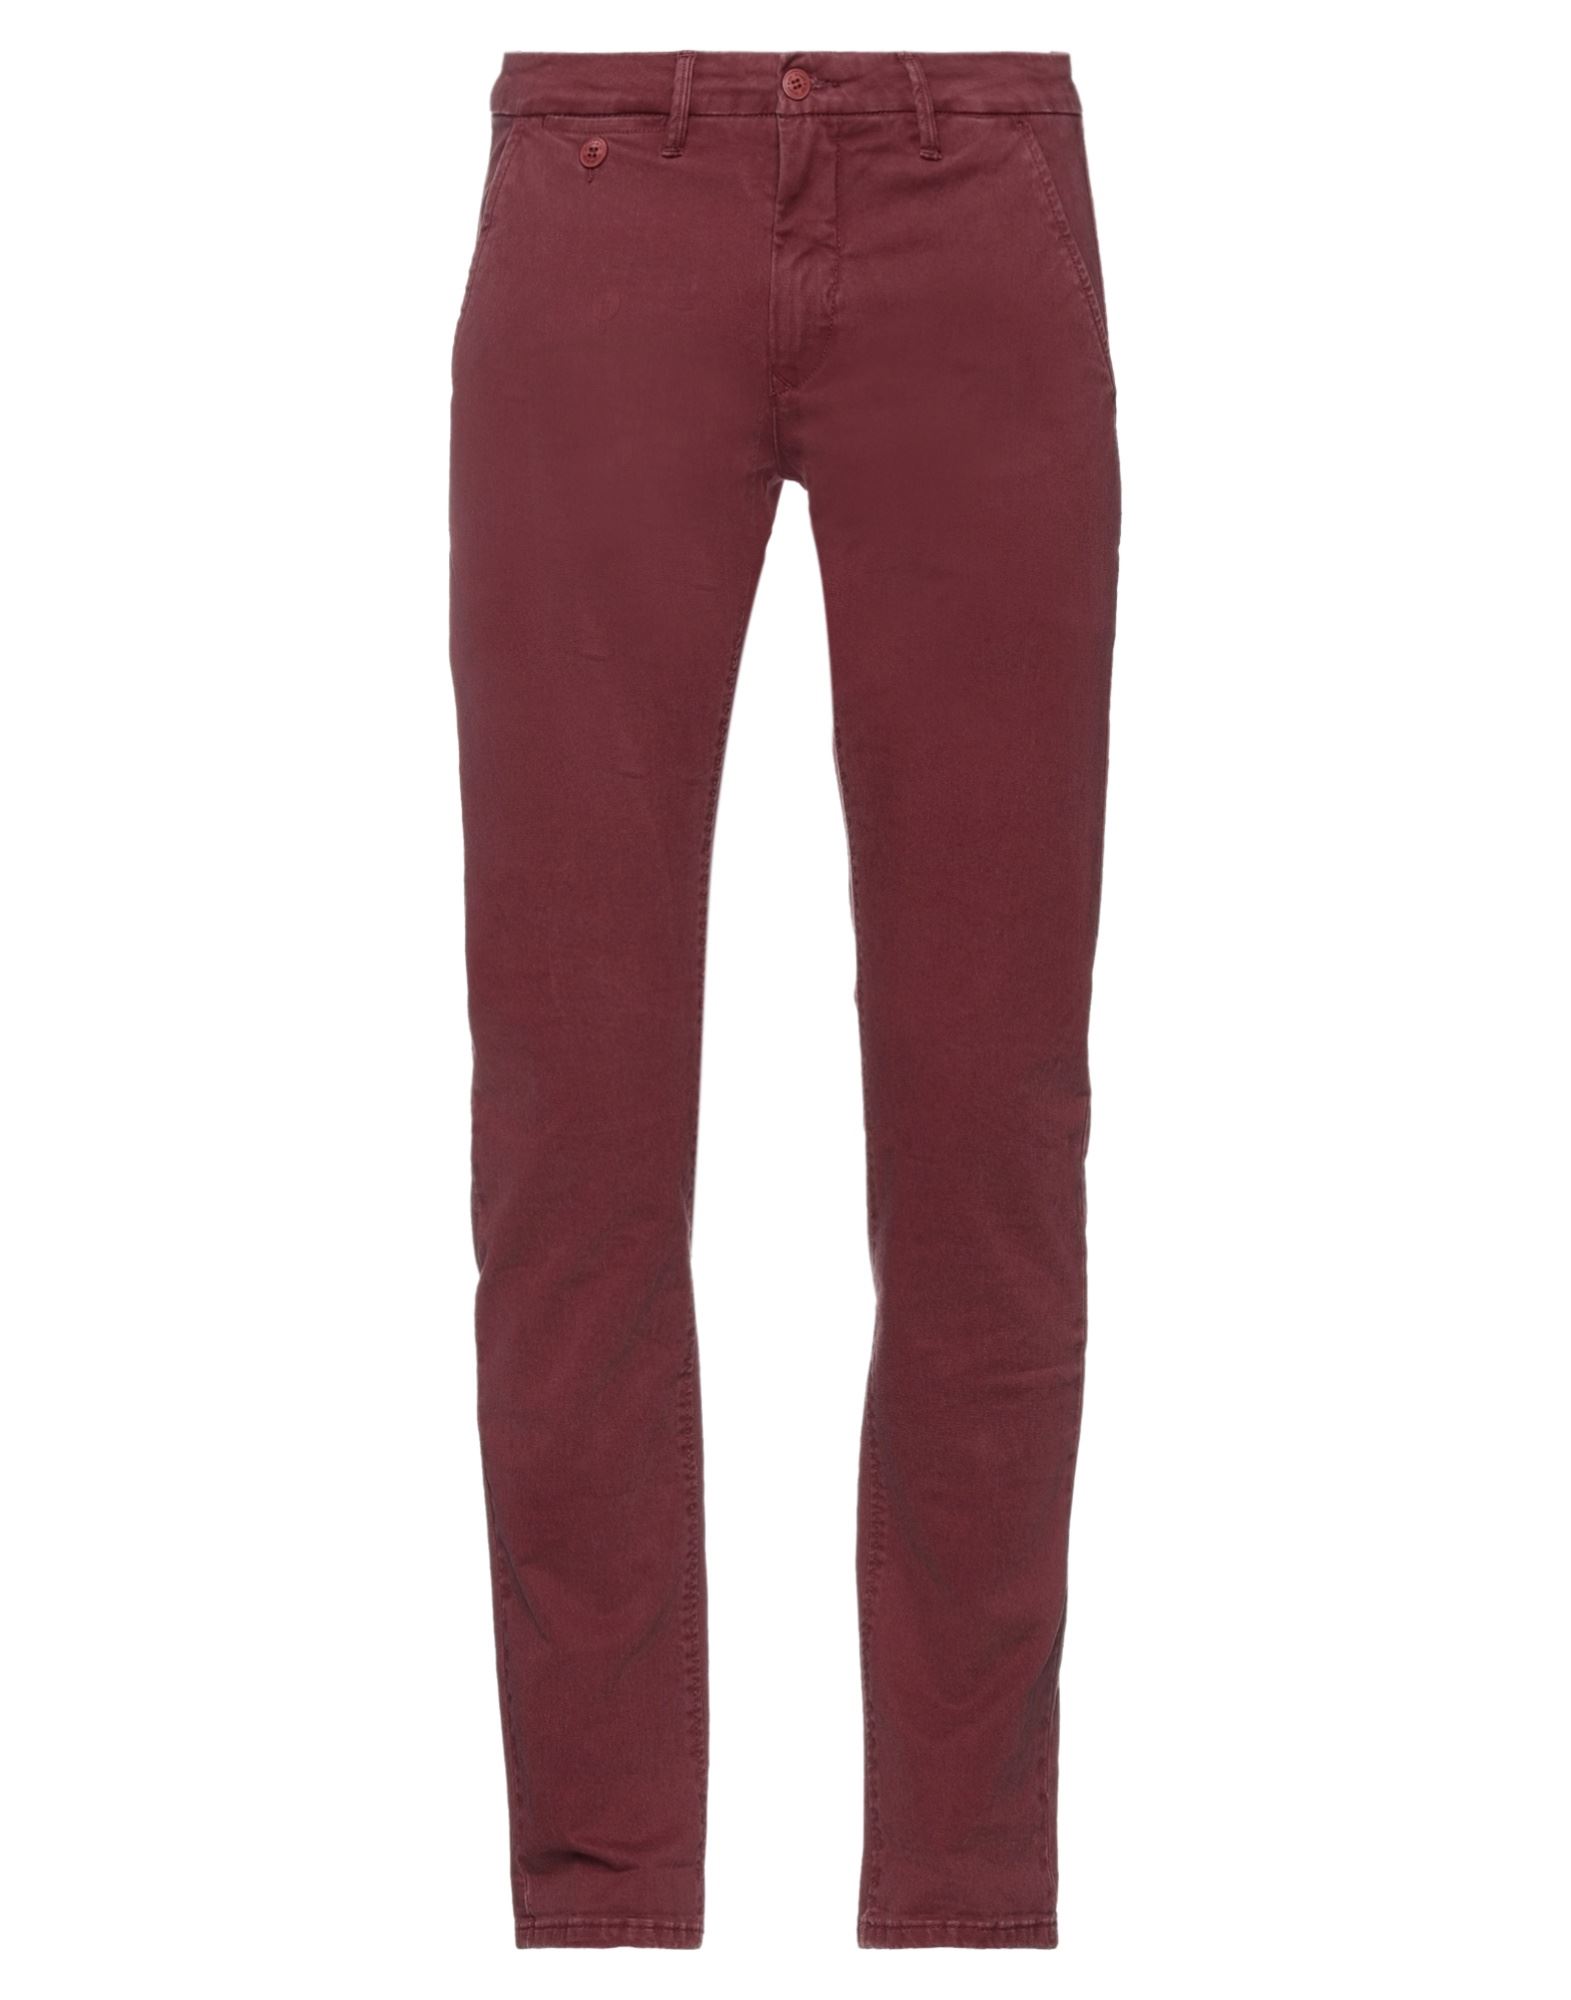 Staff Jeans & Co. Pants In Maroon | ModeSens